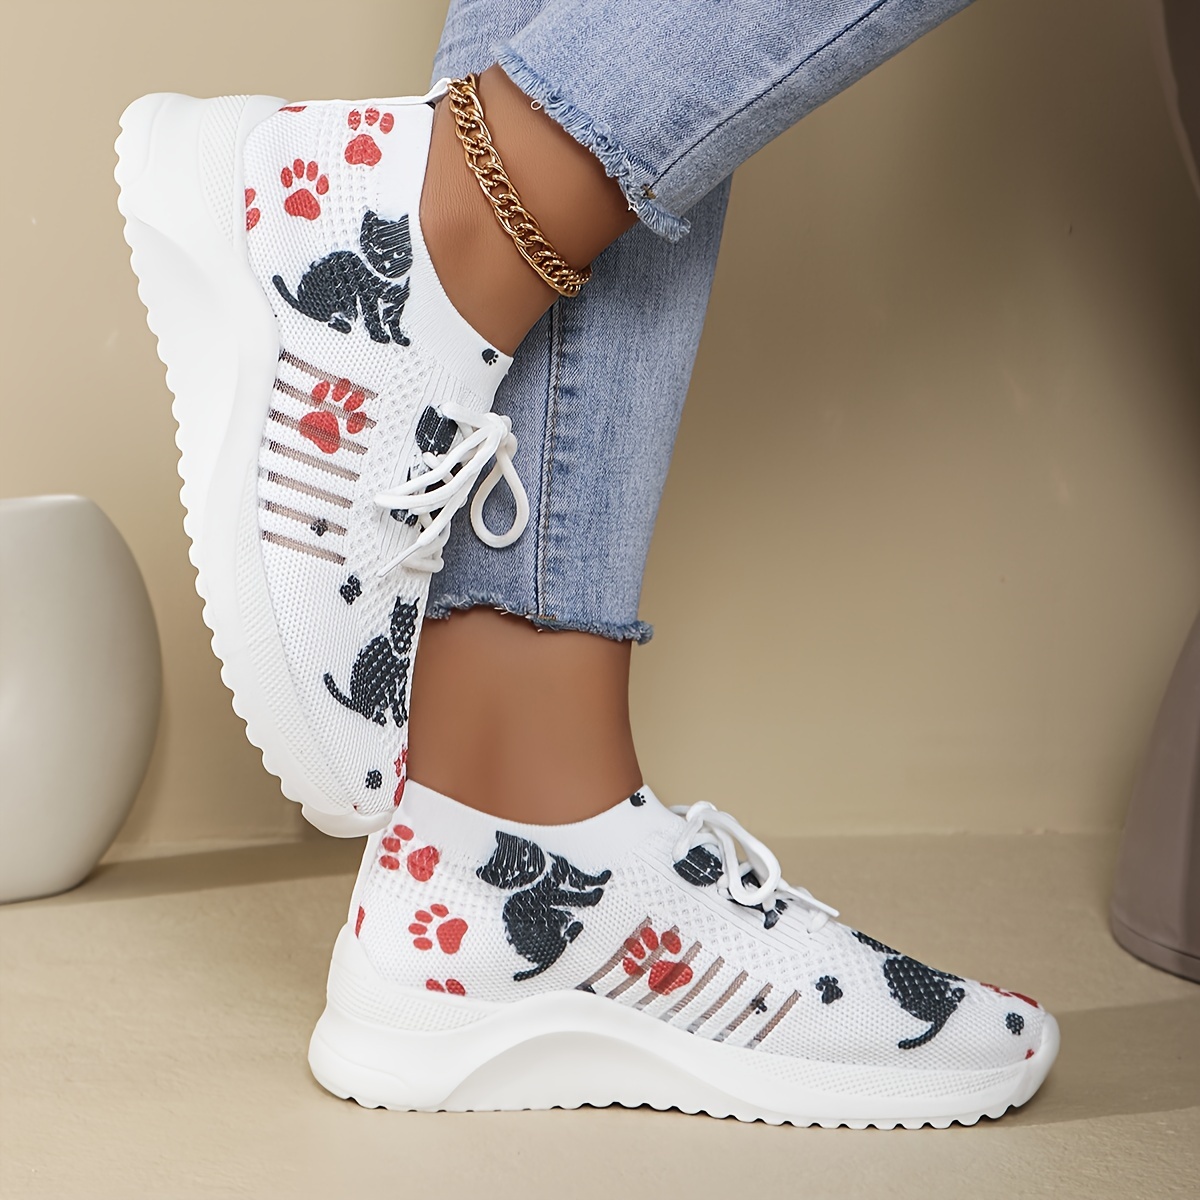 

Women's Black Cat Pattern Sneakers, Breathable Lace Up Knitted Platform Trainers, Comfy Outdoor Walking Shoes